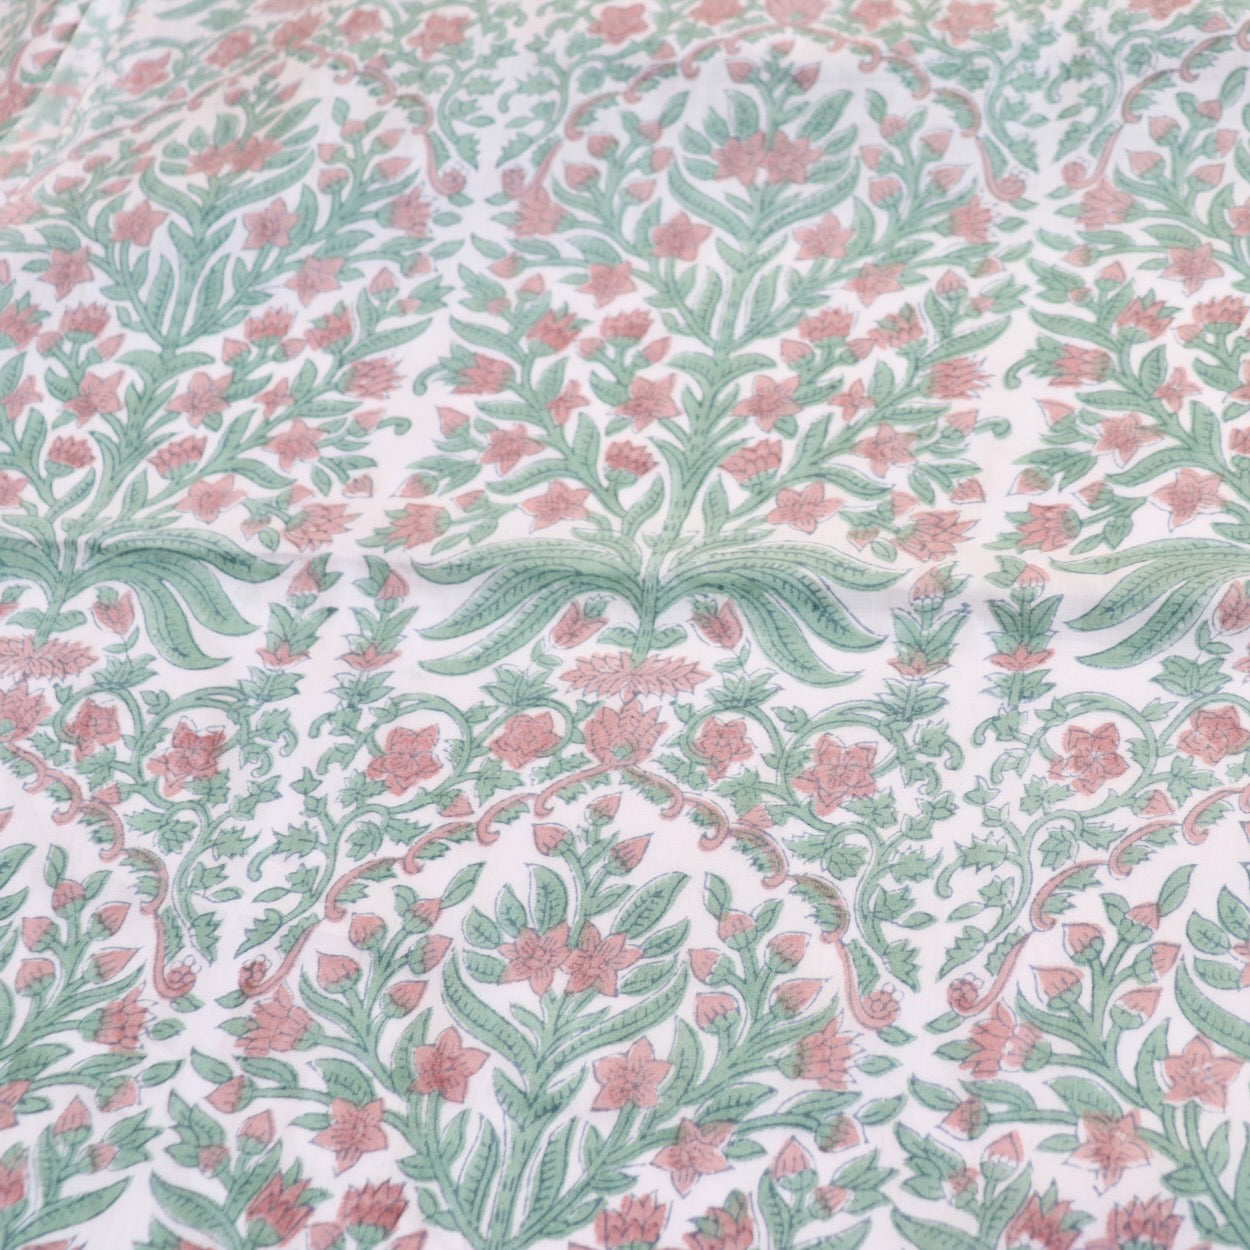 classic Indian floral design hand block print cotton fabric for quilting and dressmaking